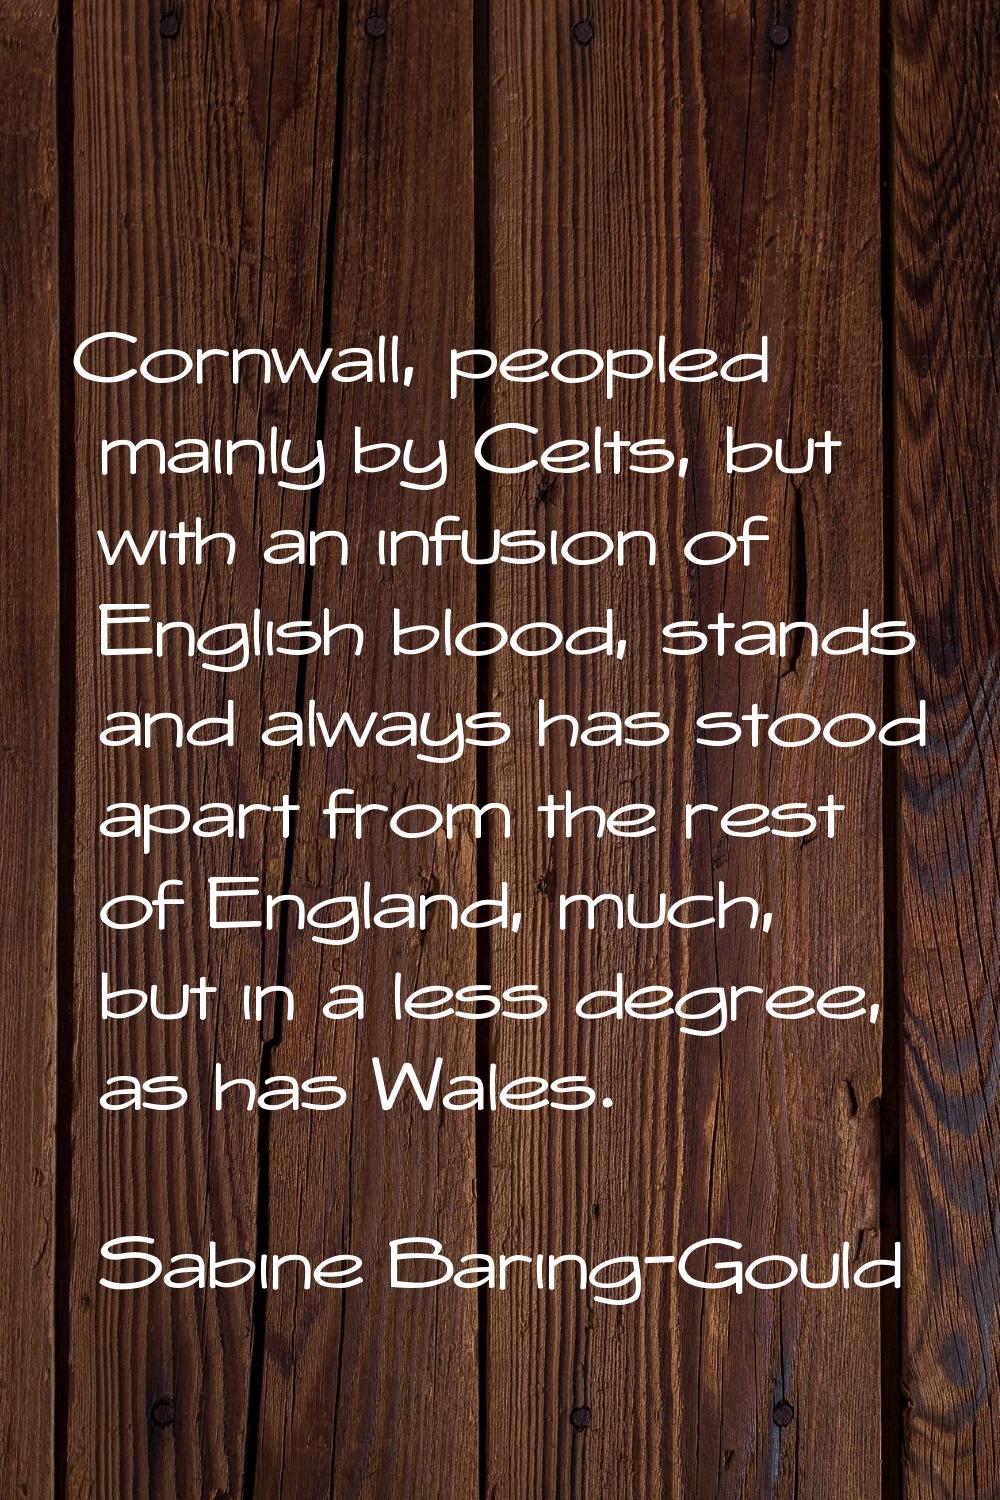 Cornwall, peopled mainly by Celts, but with an infusion of English blood, stands and always has sto